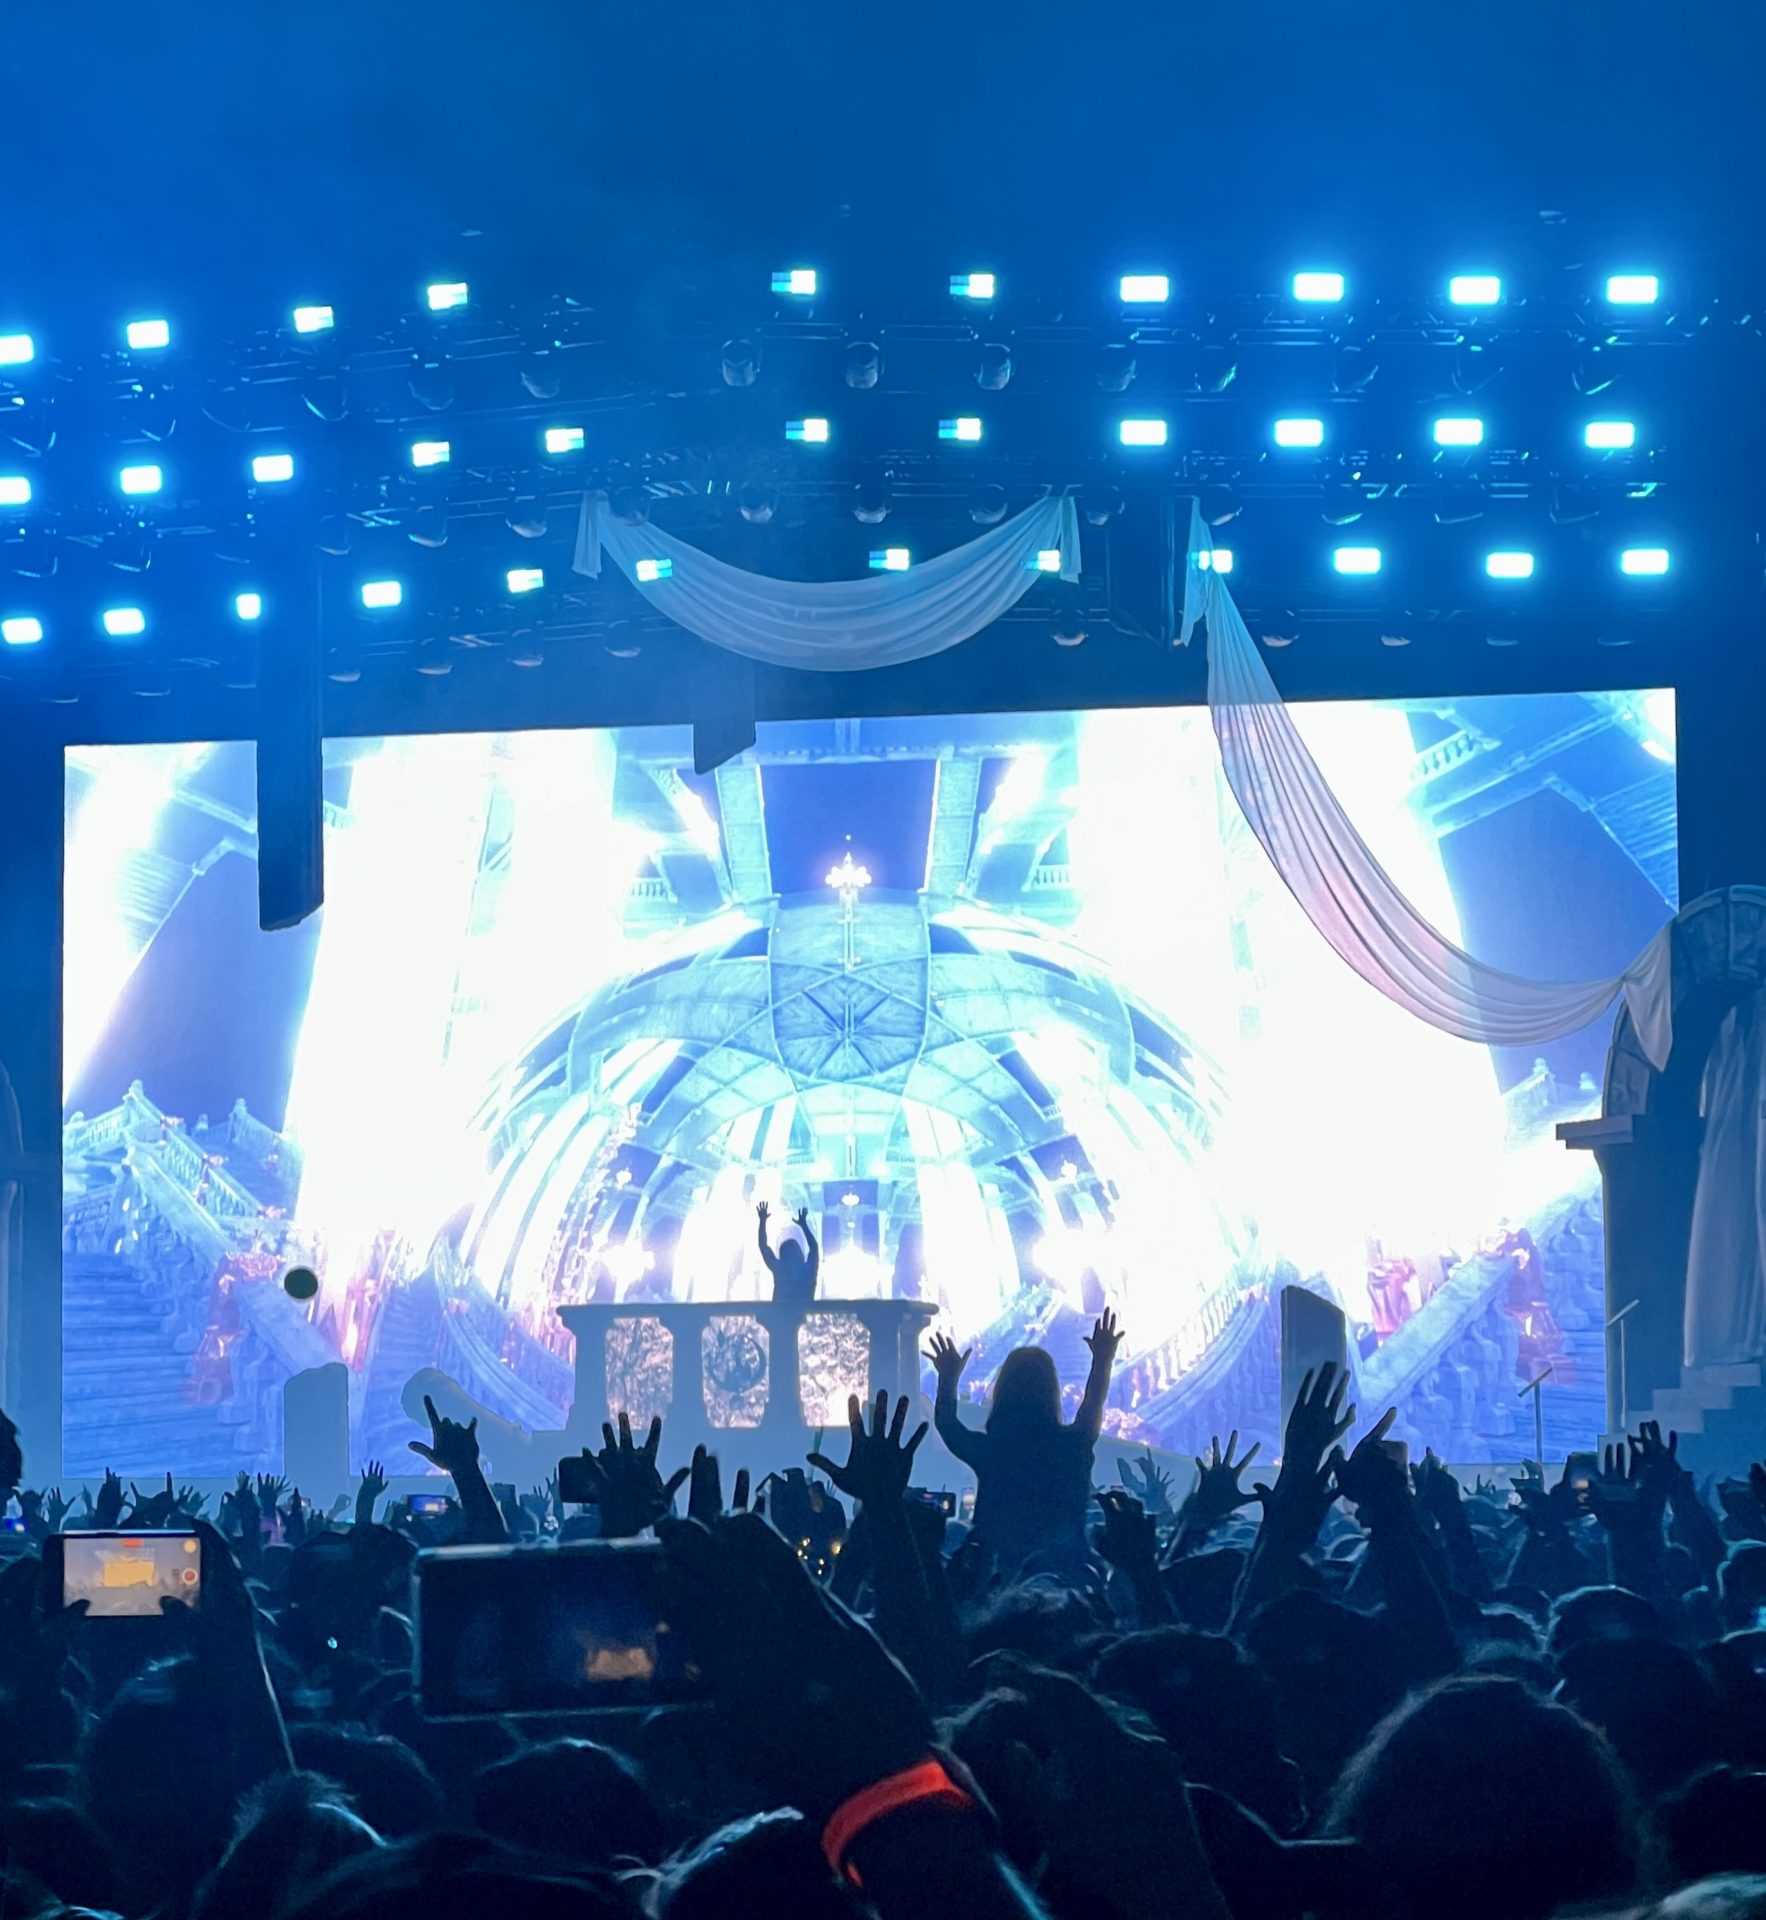 A photo of Seven Lions taken at the Tacoma Dome during the Beyond the Veil tour. Seven lions is seen Djing with his hands in the air. The background shows a blue crystal dome with blue lighting.